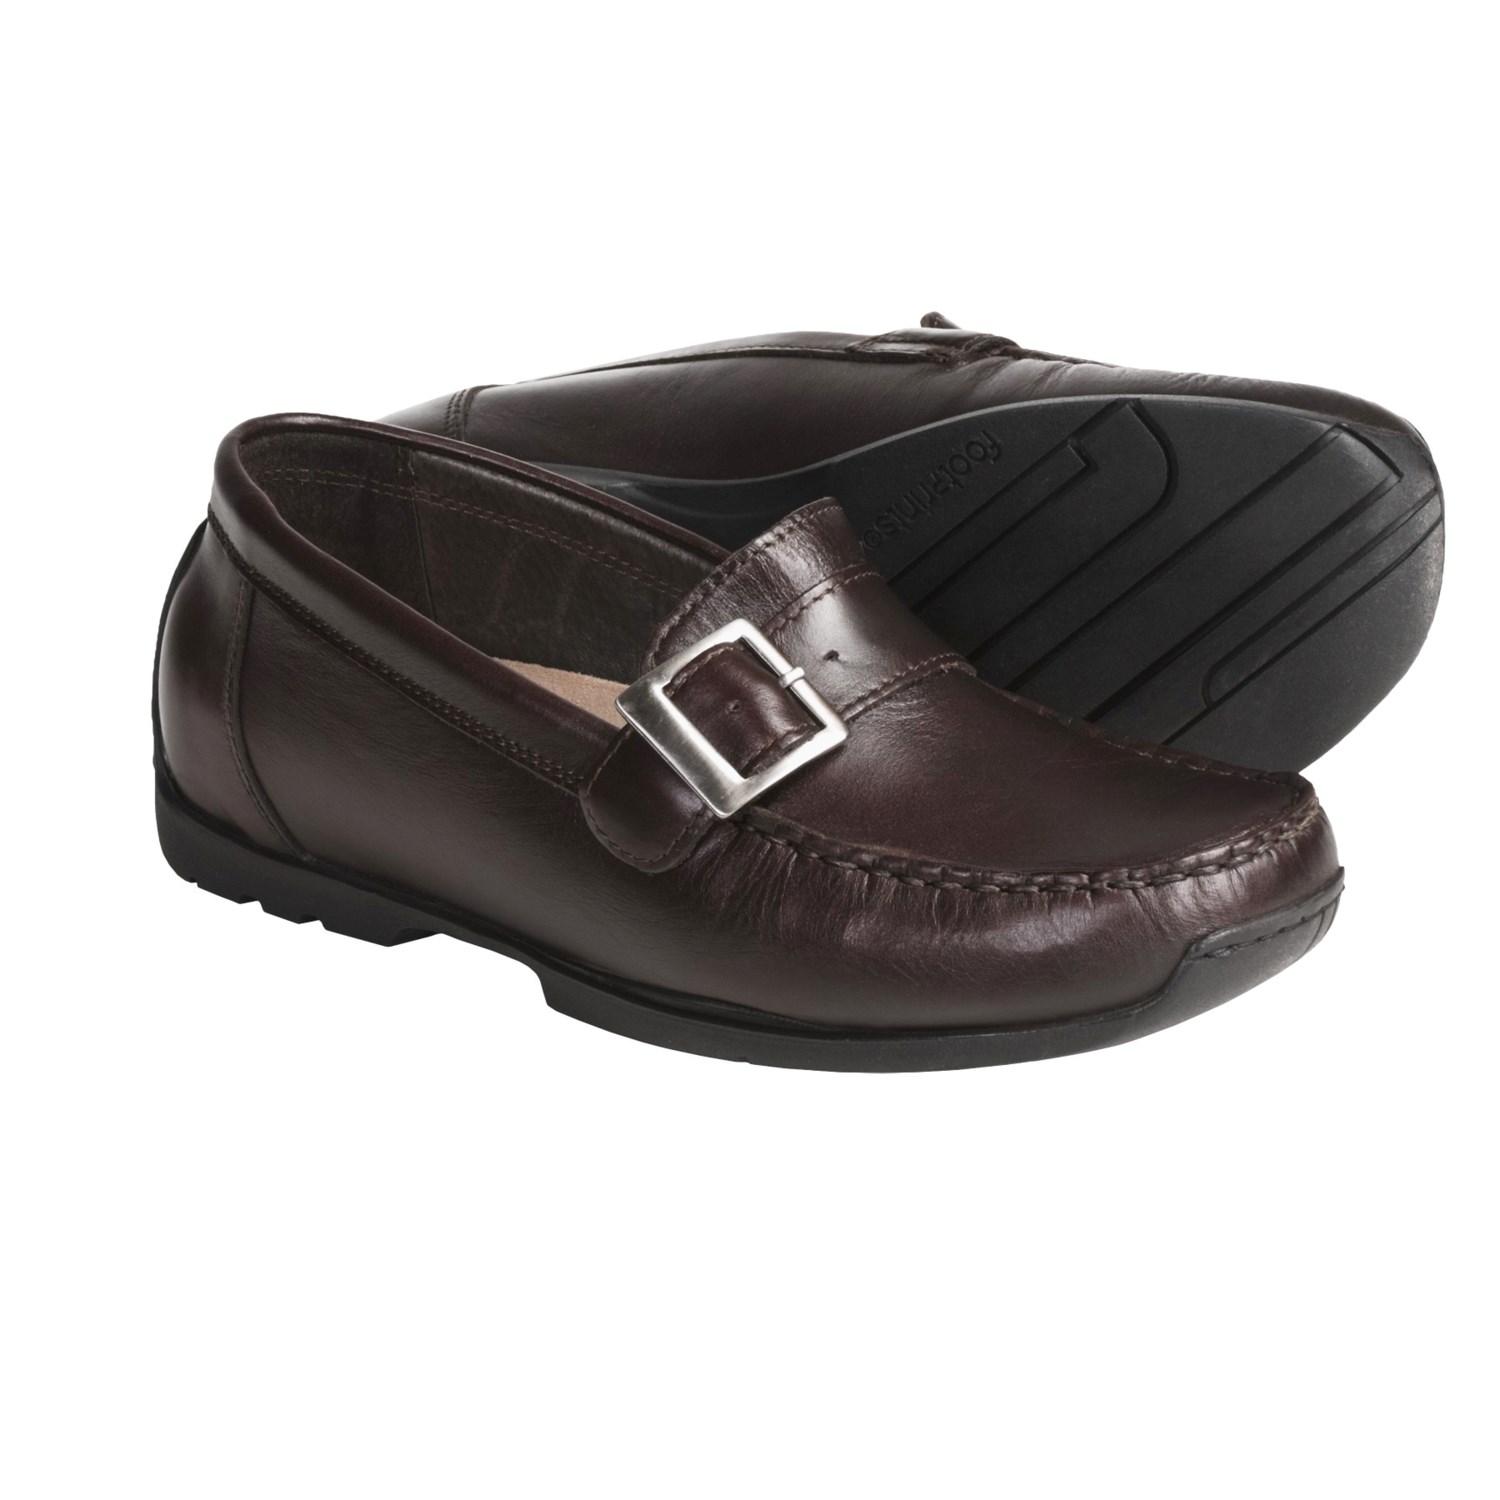 Footprints by Birkenstock Cleveland Loafer Shoes - Leather (For Women ...